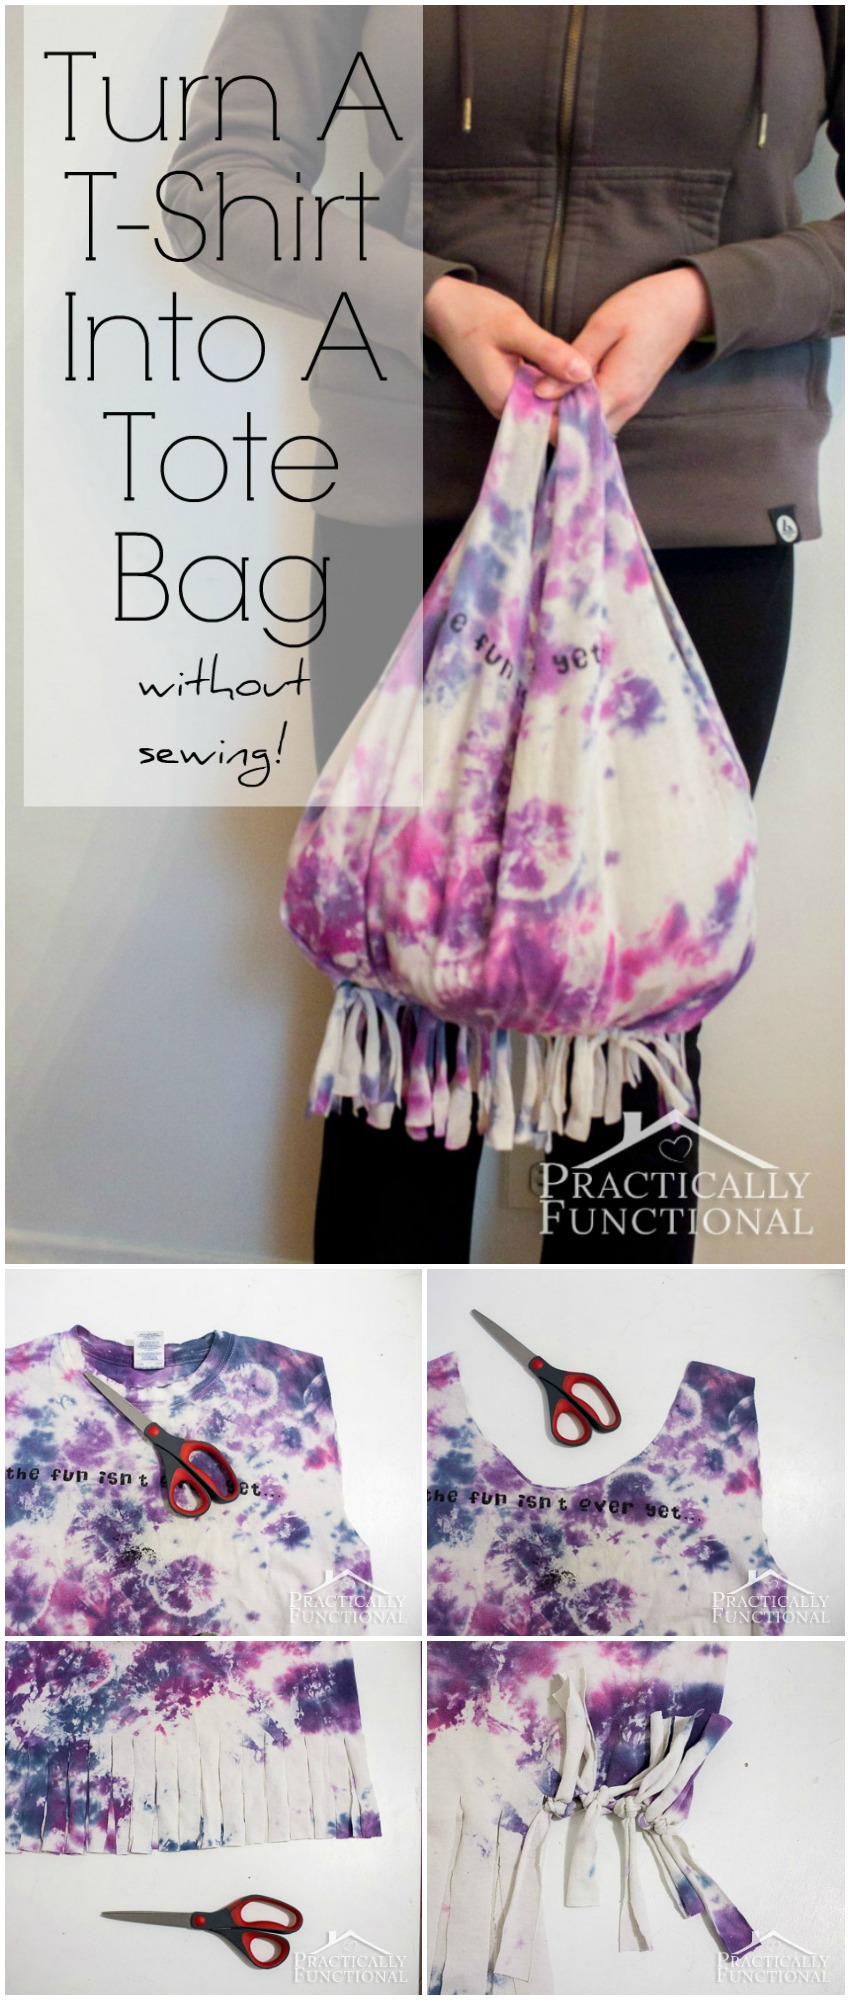 How To Turn A T-Shirt Into A Tote Bag Without Sewing!